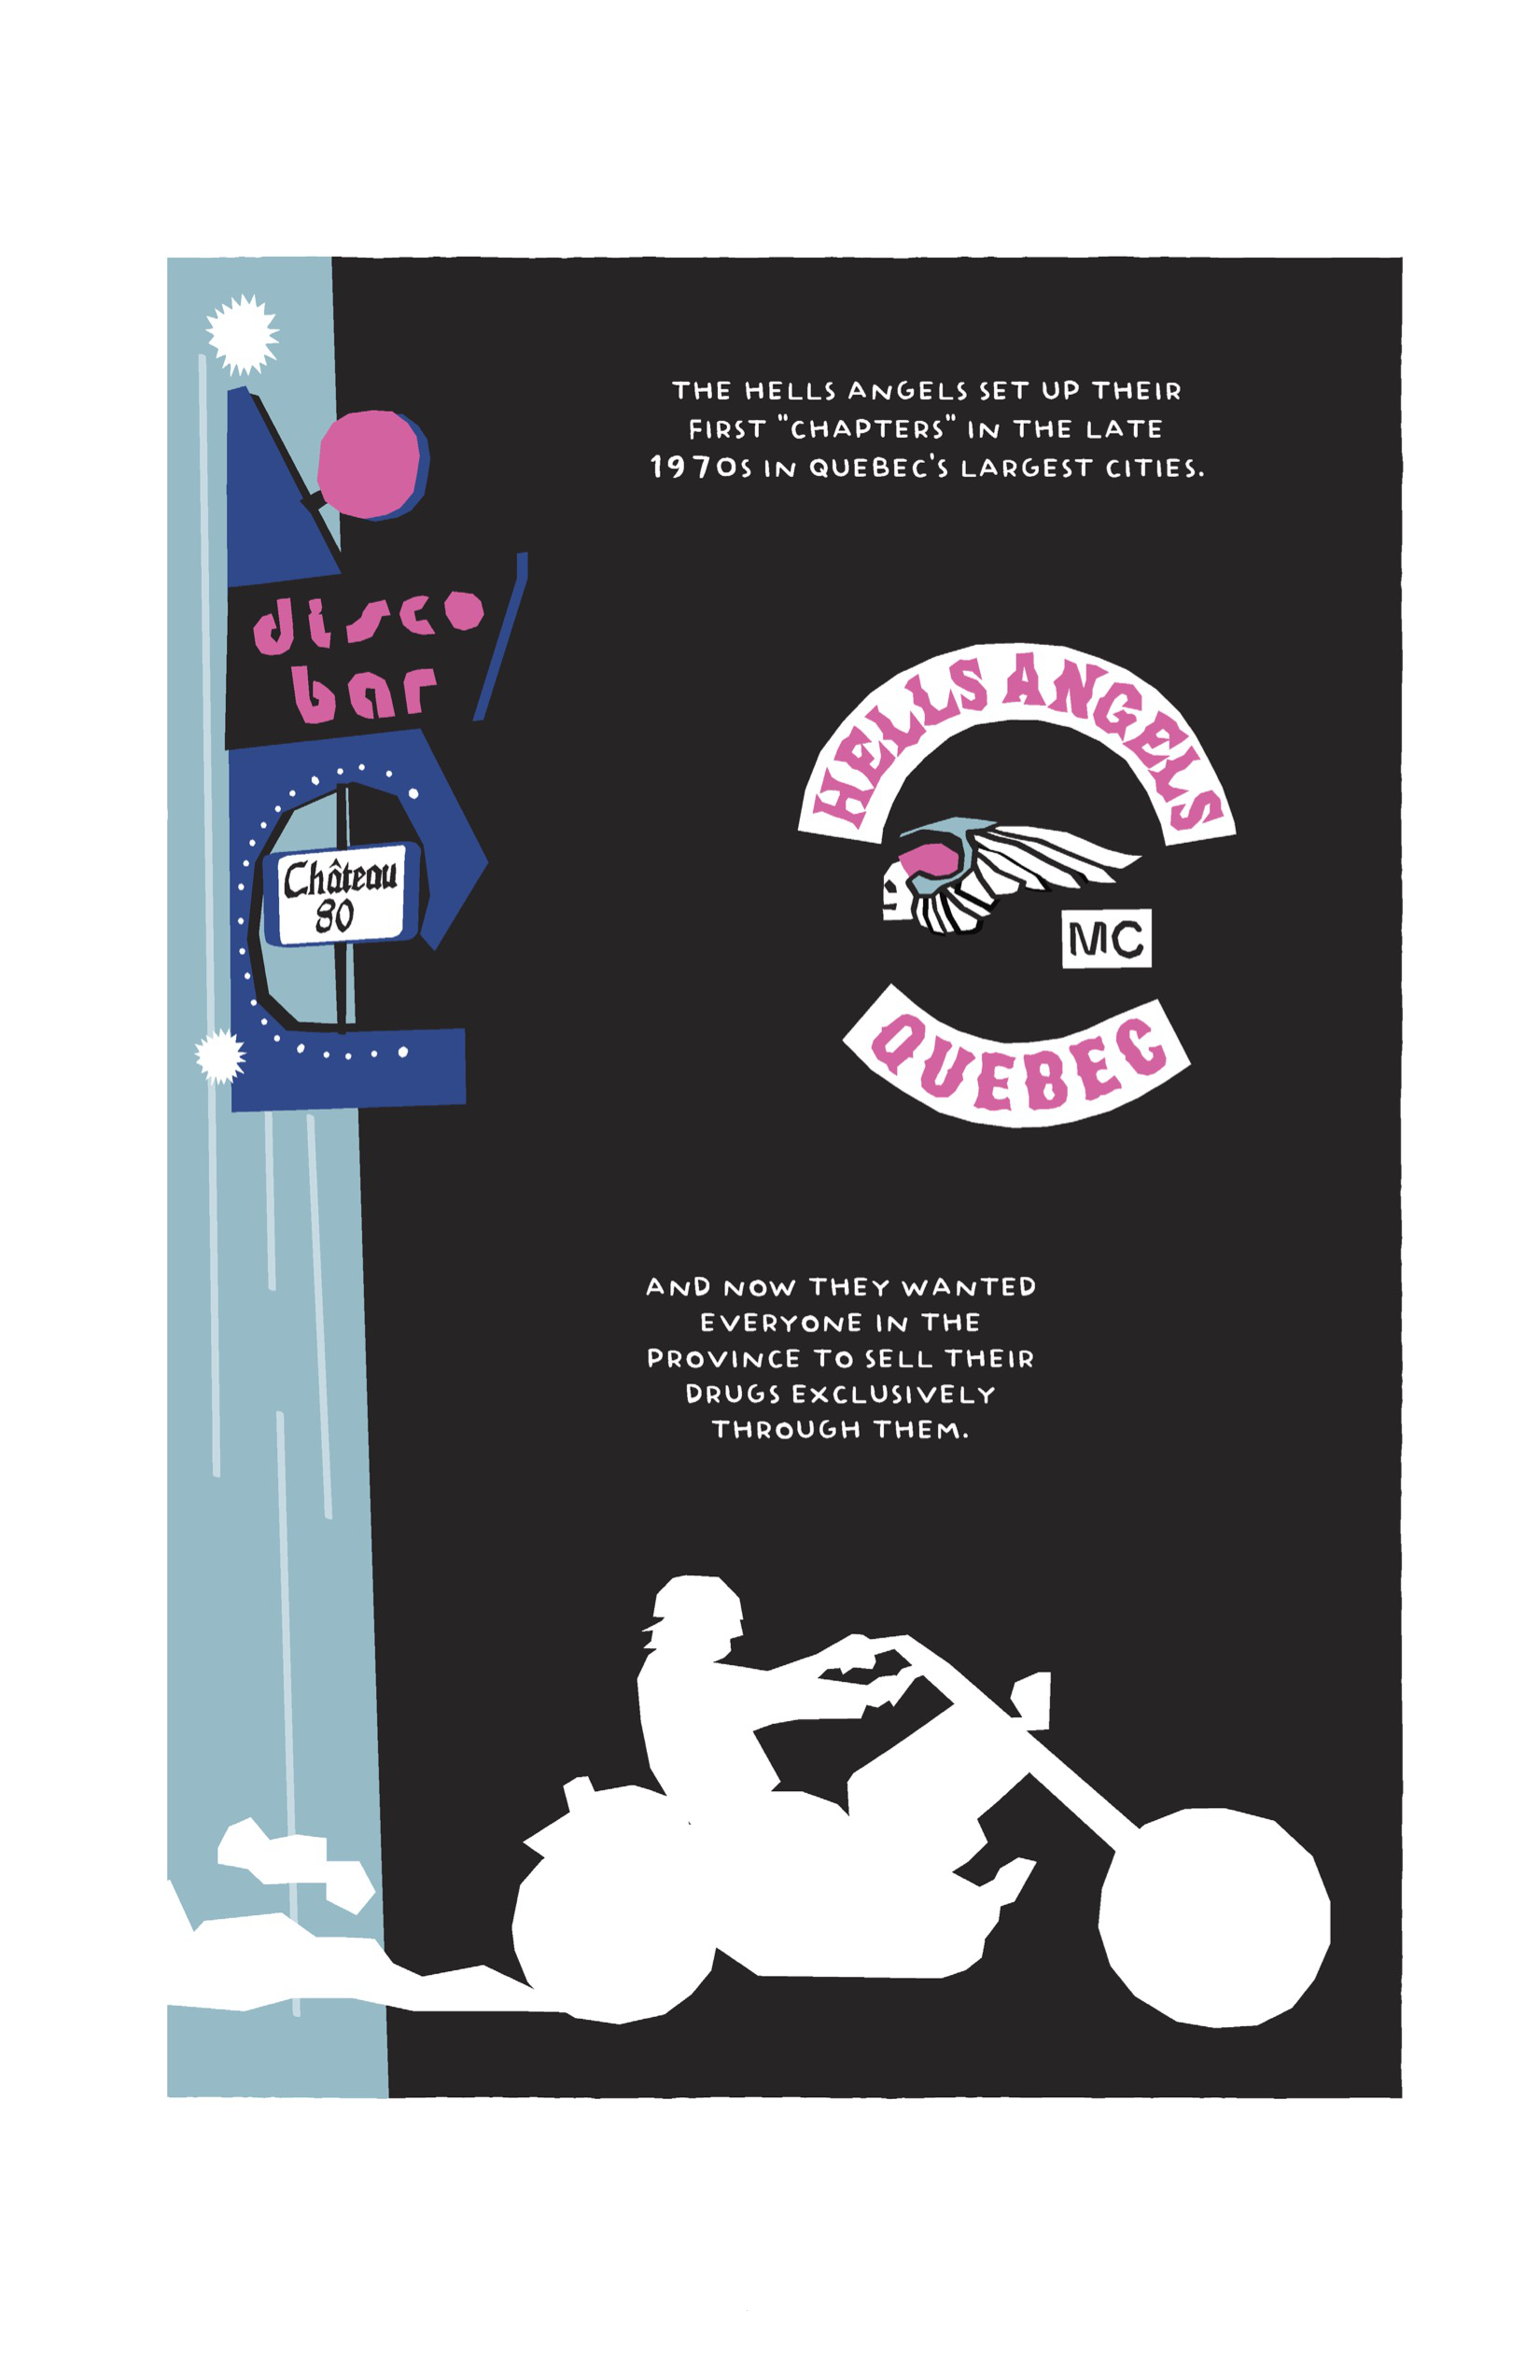 One panel spreads across the whole page. At the bottom, a man speeds off in his motorcycle, rendered as a white silhouette across a black background. A cyan building stretches from top to bottom at the left of the page, with a funky sign in dark blue, pink, and black that reads â€˜Disco Bar Chateau 80.â€™ In the middle of the page is the logo for Hells Angels MC (Motorcycle Club) rendered in the comicâ€™s style: the profile of a skull facing left, with an angel wing stretching out around and behind it to the right, encircled by the text: â€œHELLS ANGELS QUEBEC.â€ The narration reads, â€œThe Hells Angels set up their first â€˜chaptersâ€™ in the late 1970s in Quebecâ€™s largest cities. And now they wanted everyone in the province to sell their drugs exclusively through them.â€